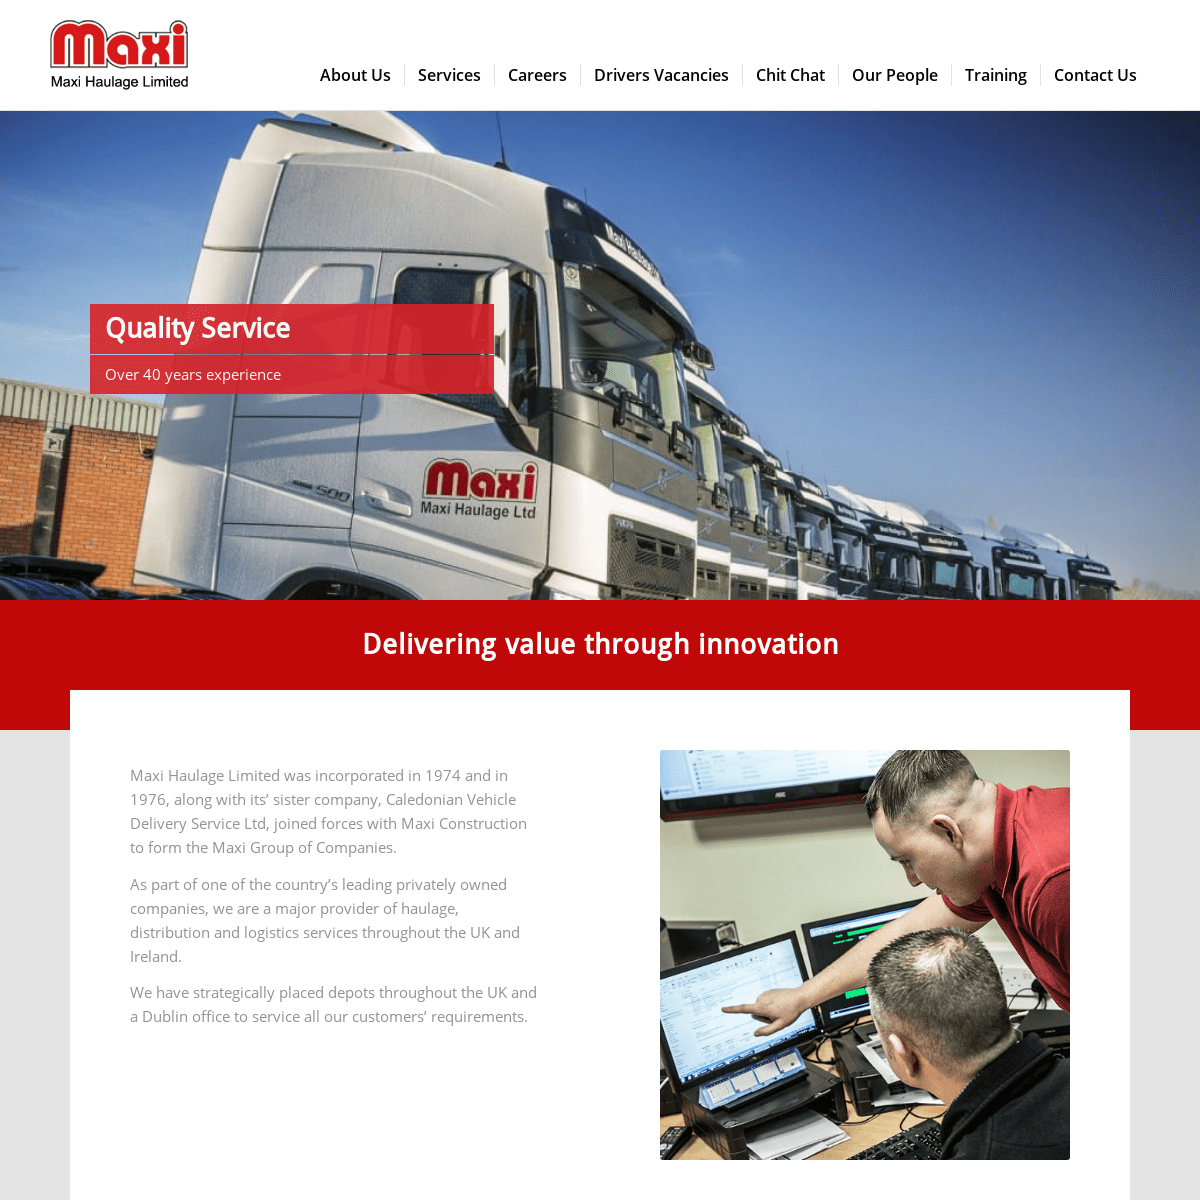 A complete backup of maxihaulage.co.uk